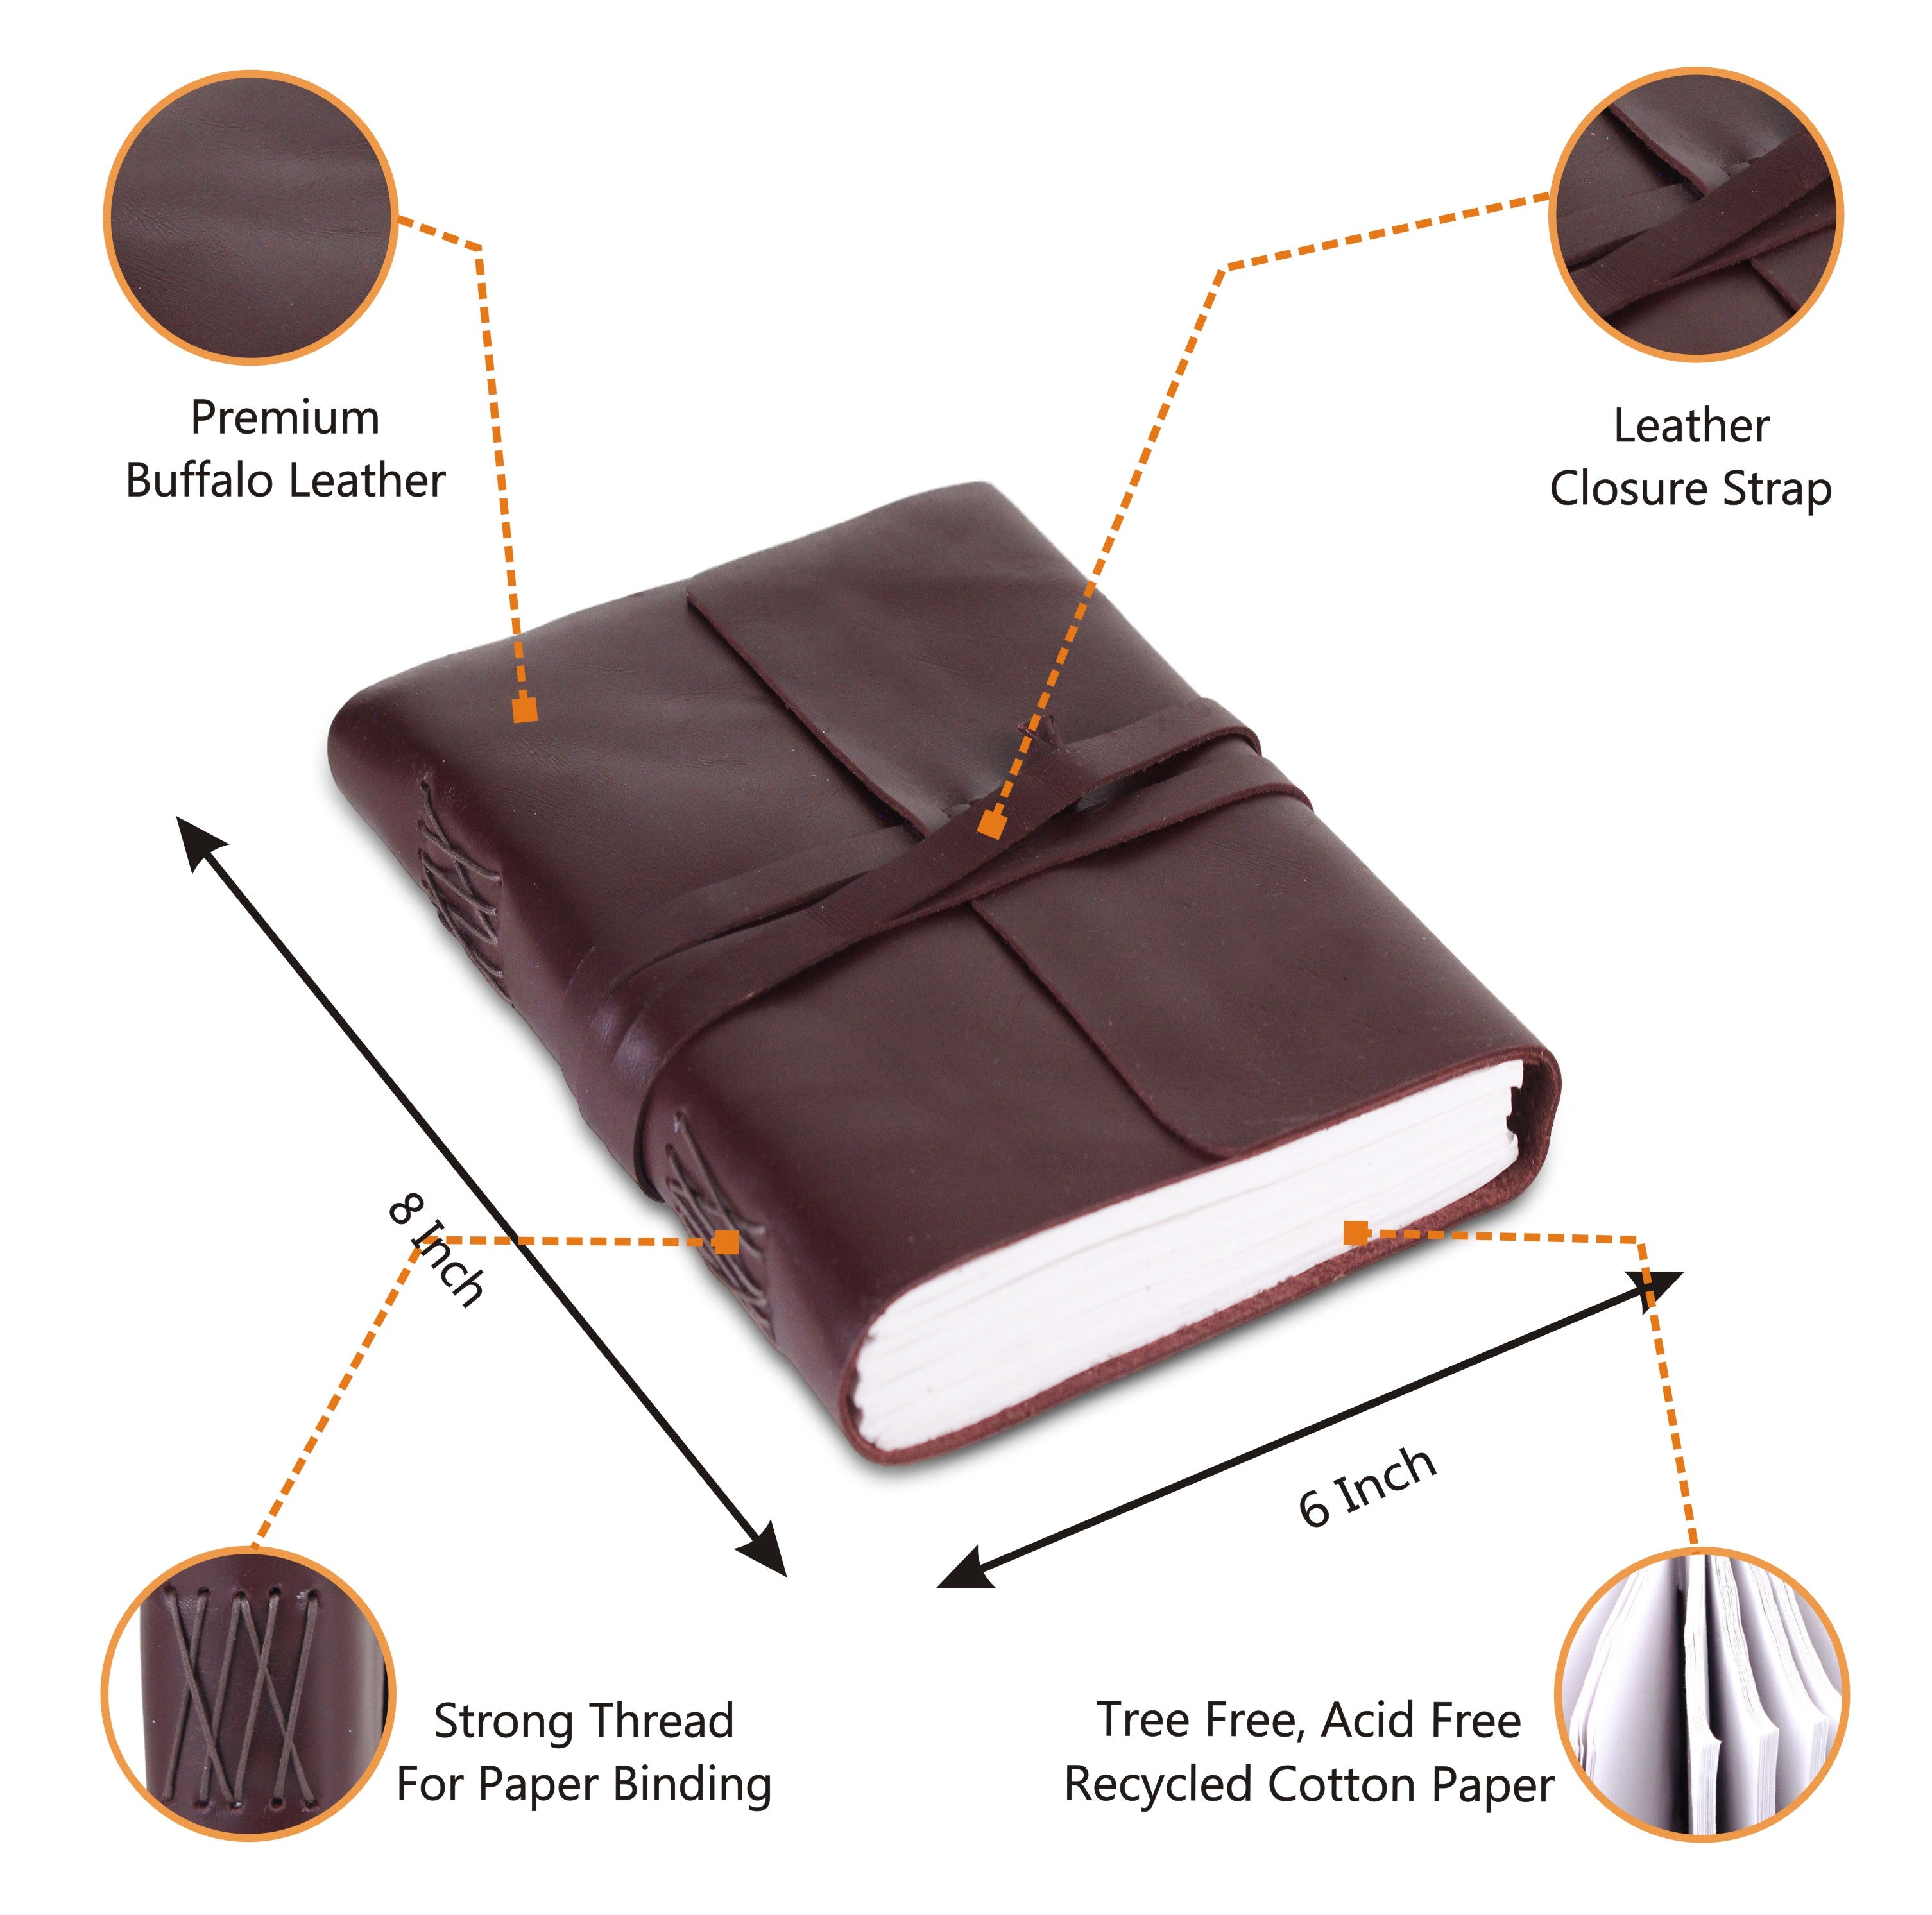 Features of Plain Brown Leather Journal Notebook with Strap Enclosure